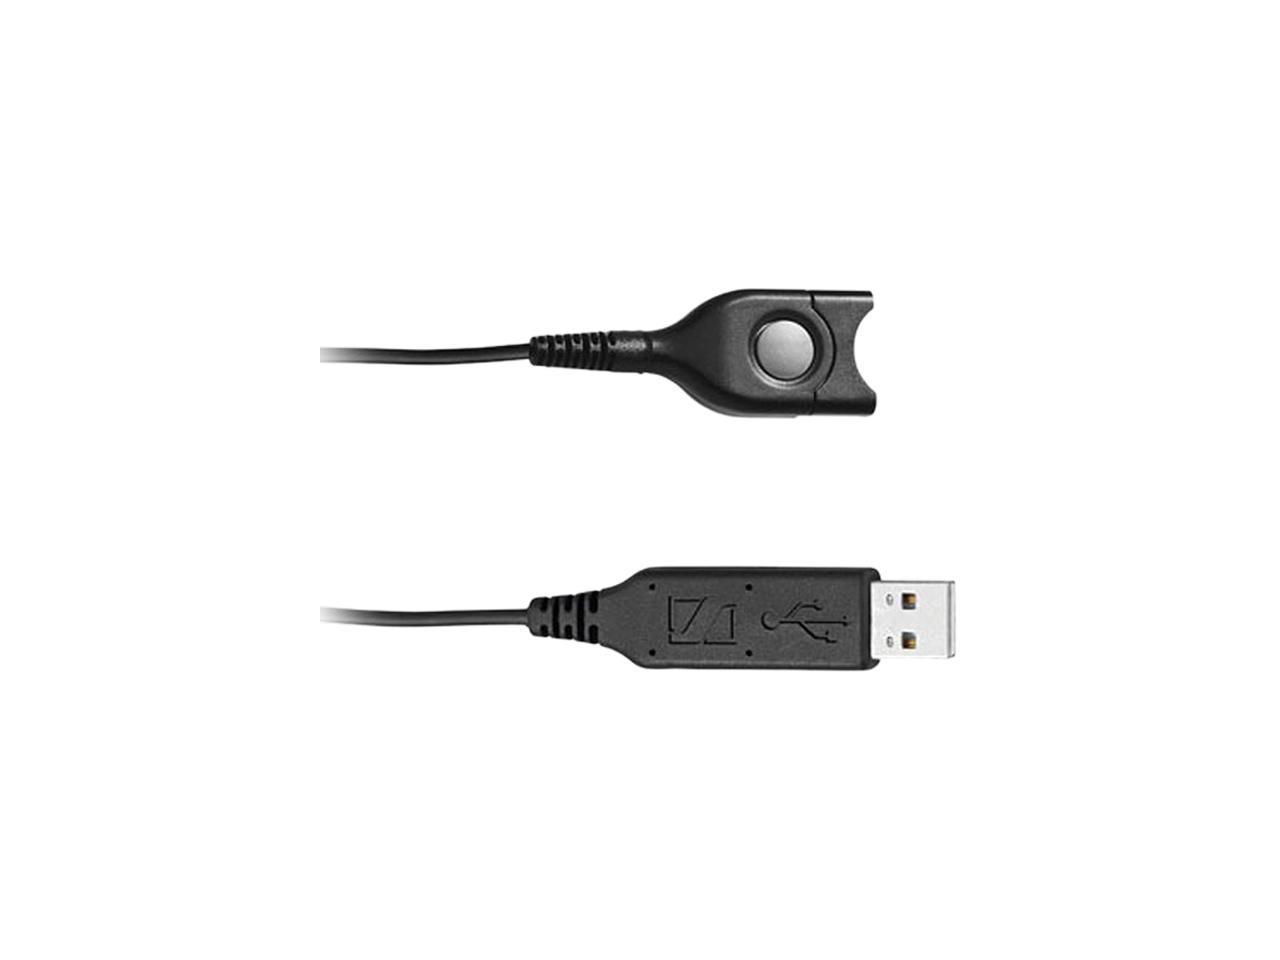 USB-ED CORD TO QUICK DISCONNECT